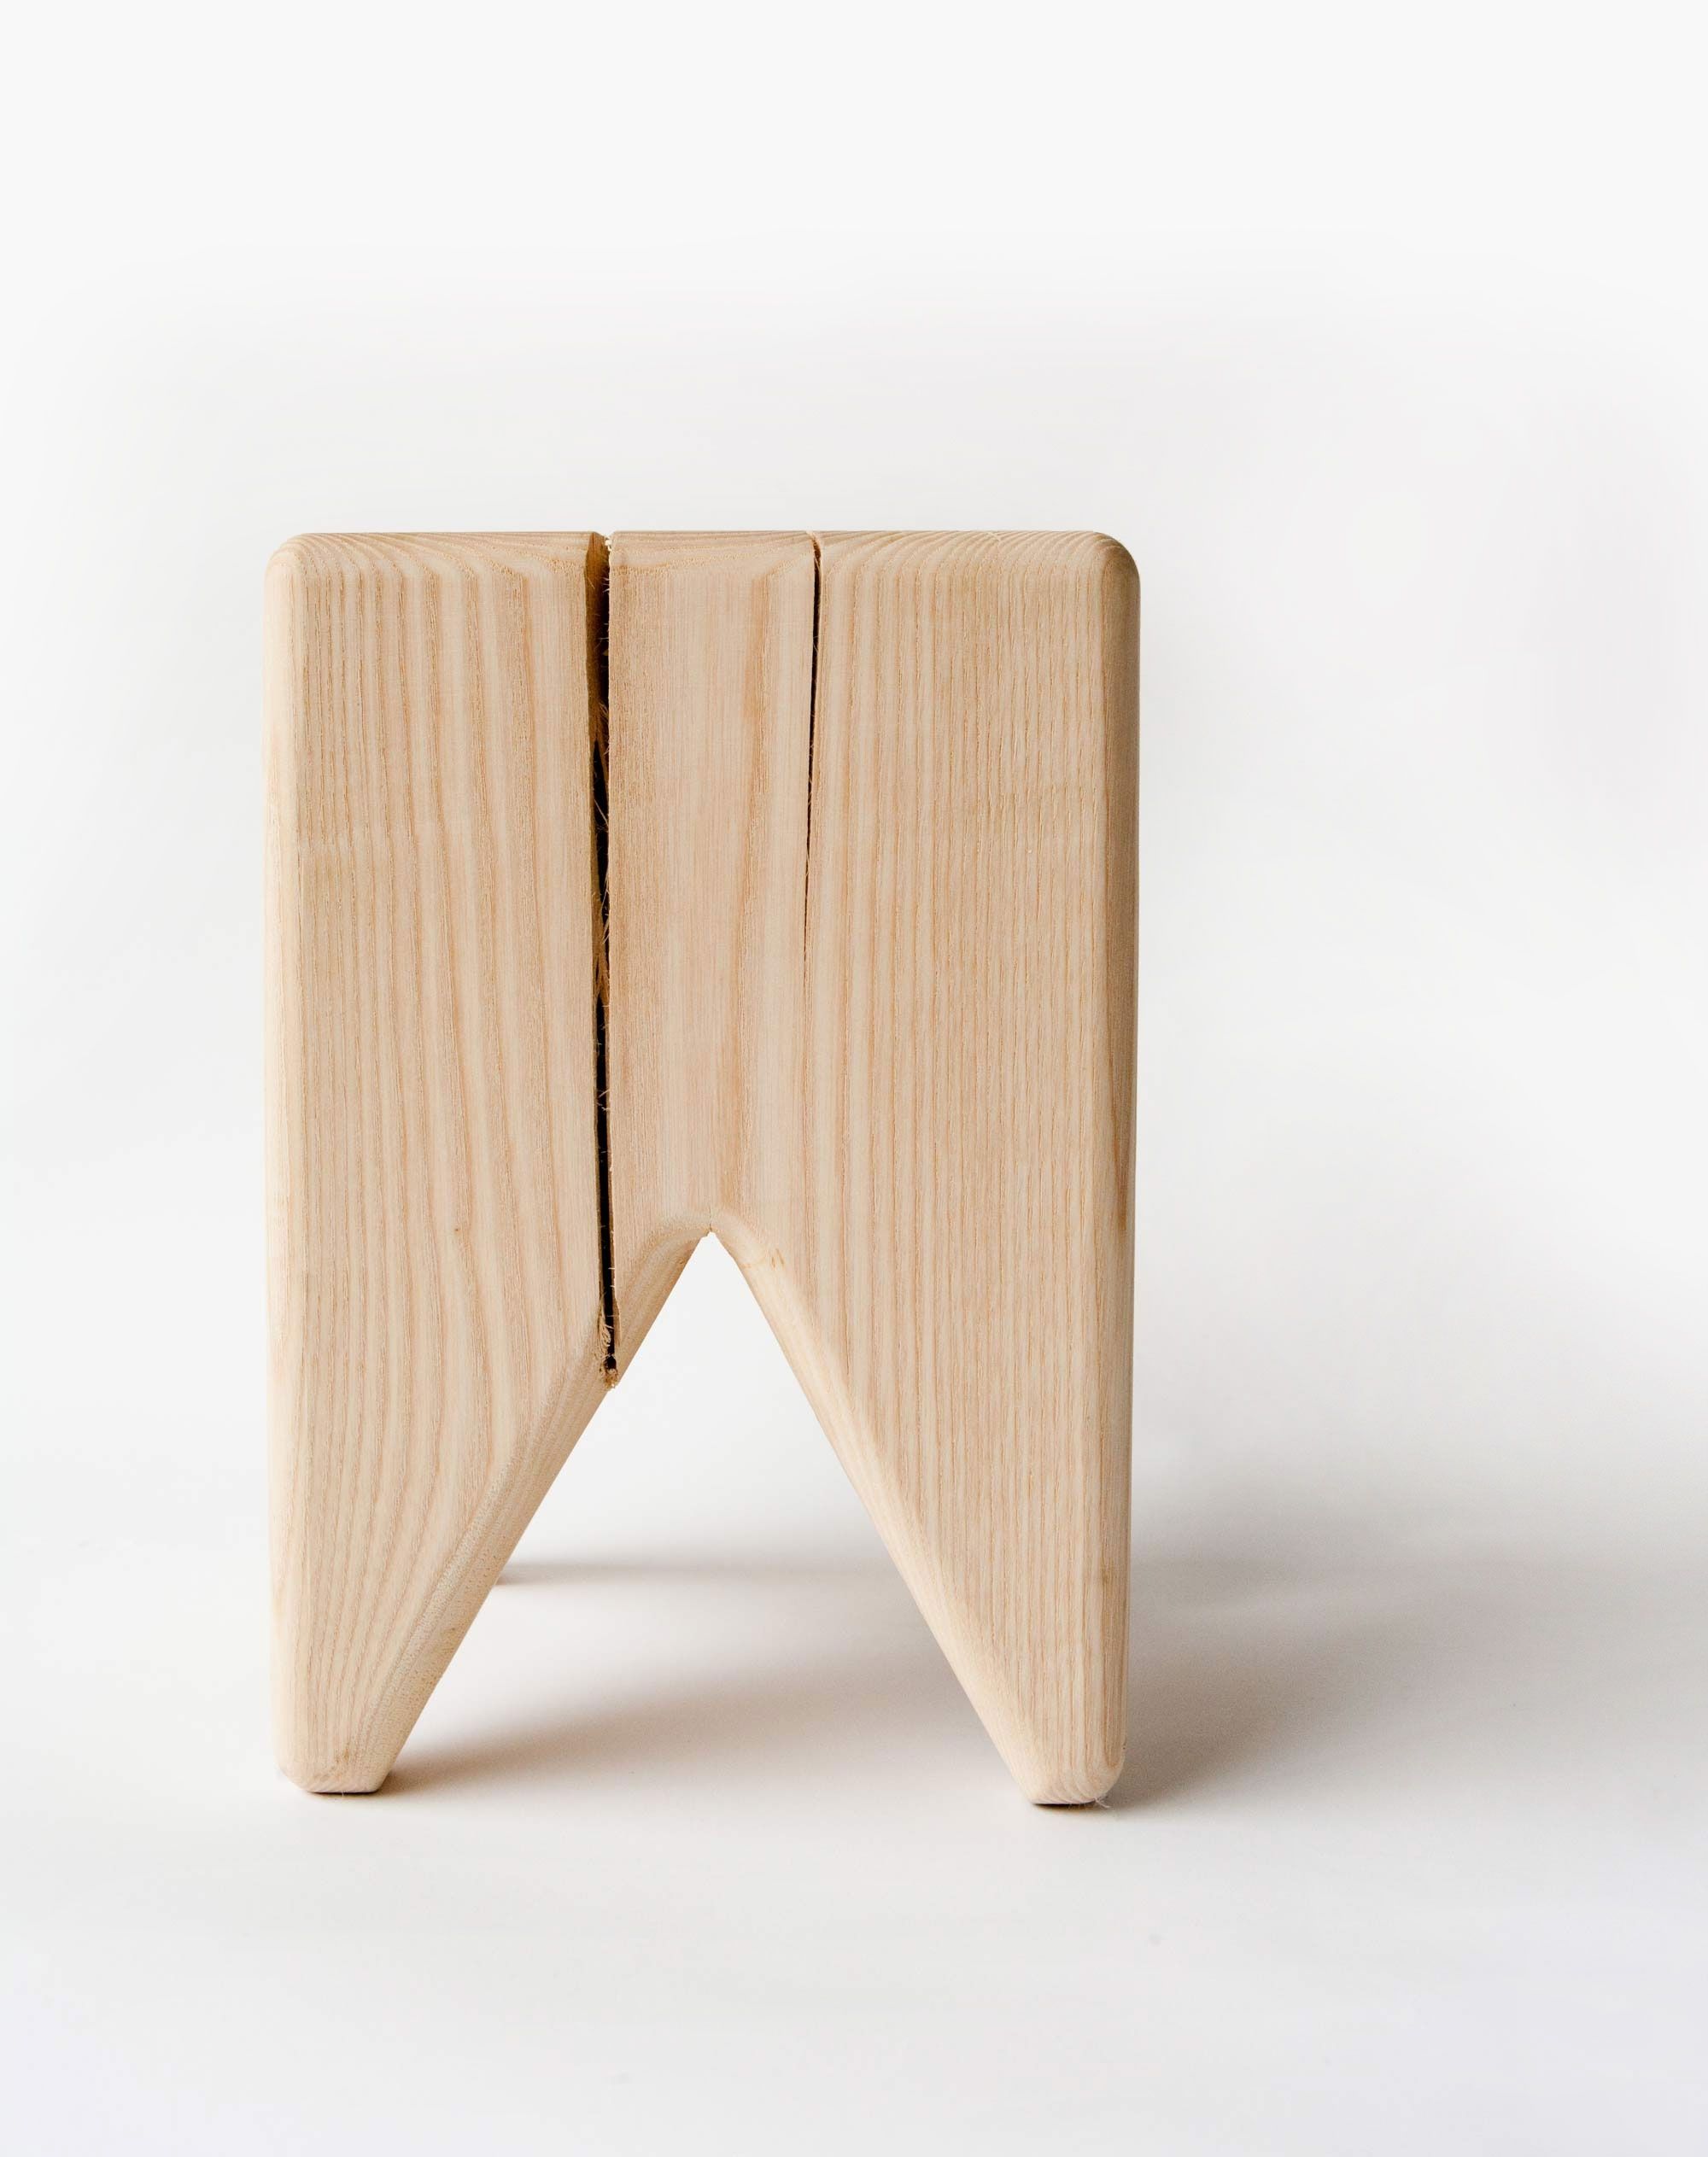 Stump – Modern Raw Wood Stool Or Side Table | Kalon Studios Us With Regard To Fresh Cut Side Tables (View 6 of 30)